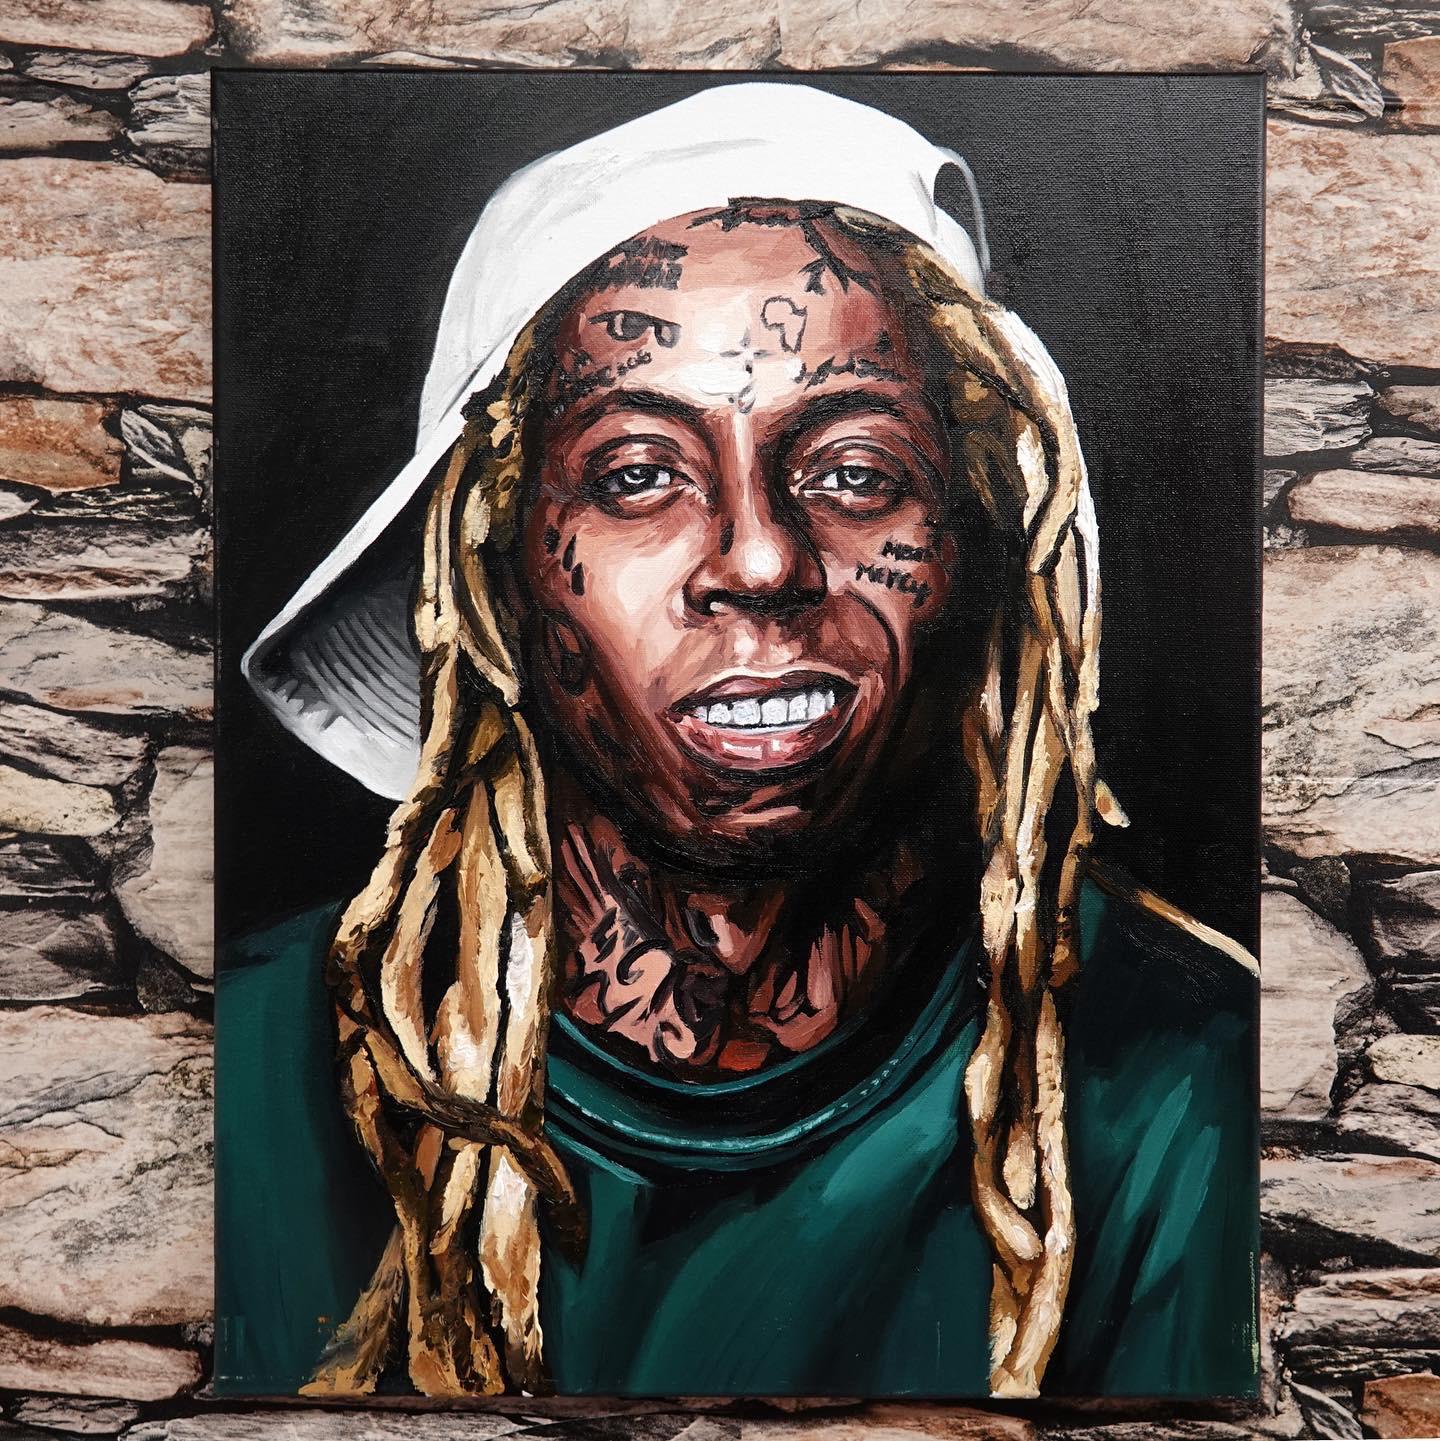 Lil Wayne. I just finished this painting.